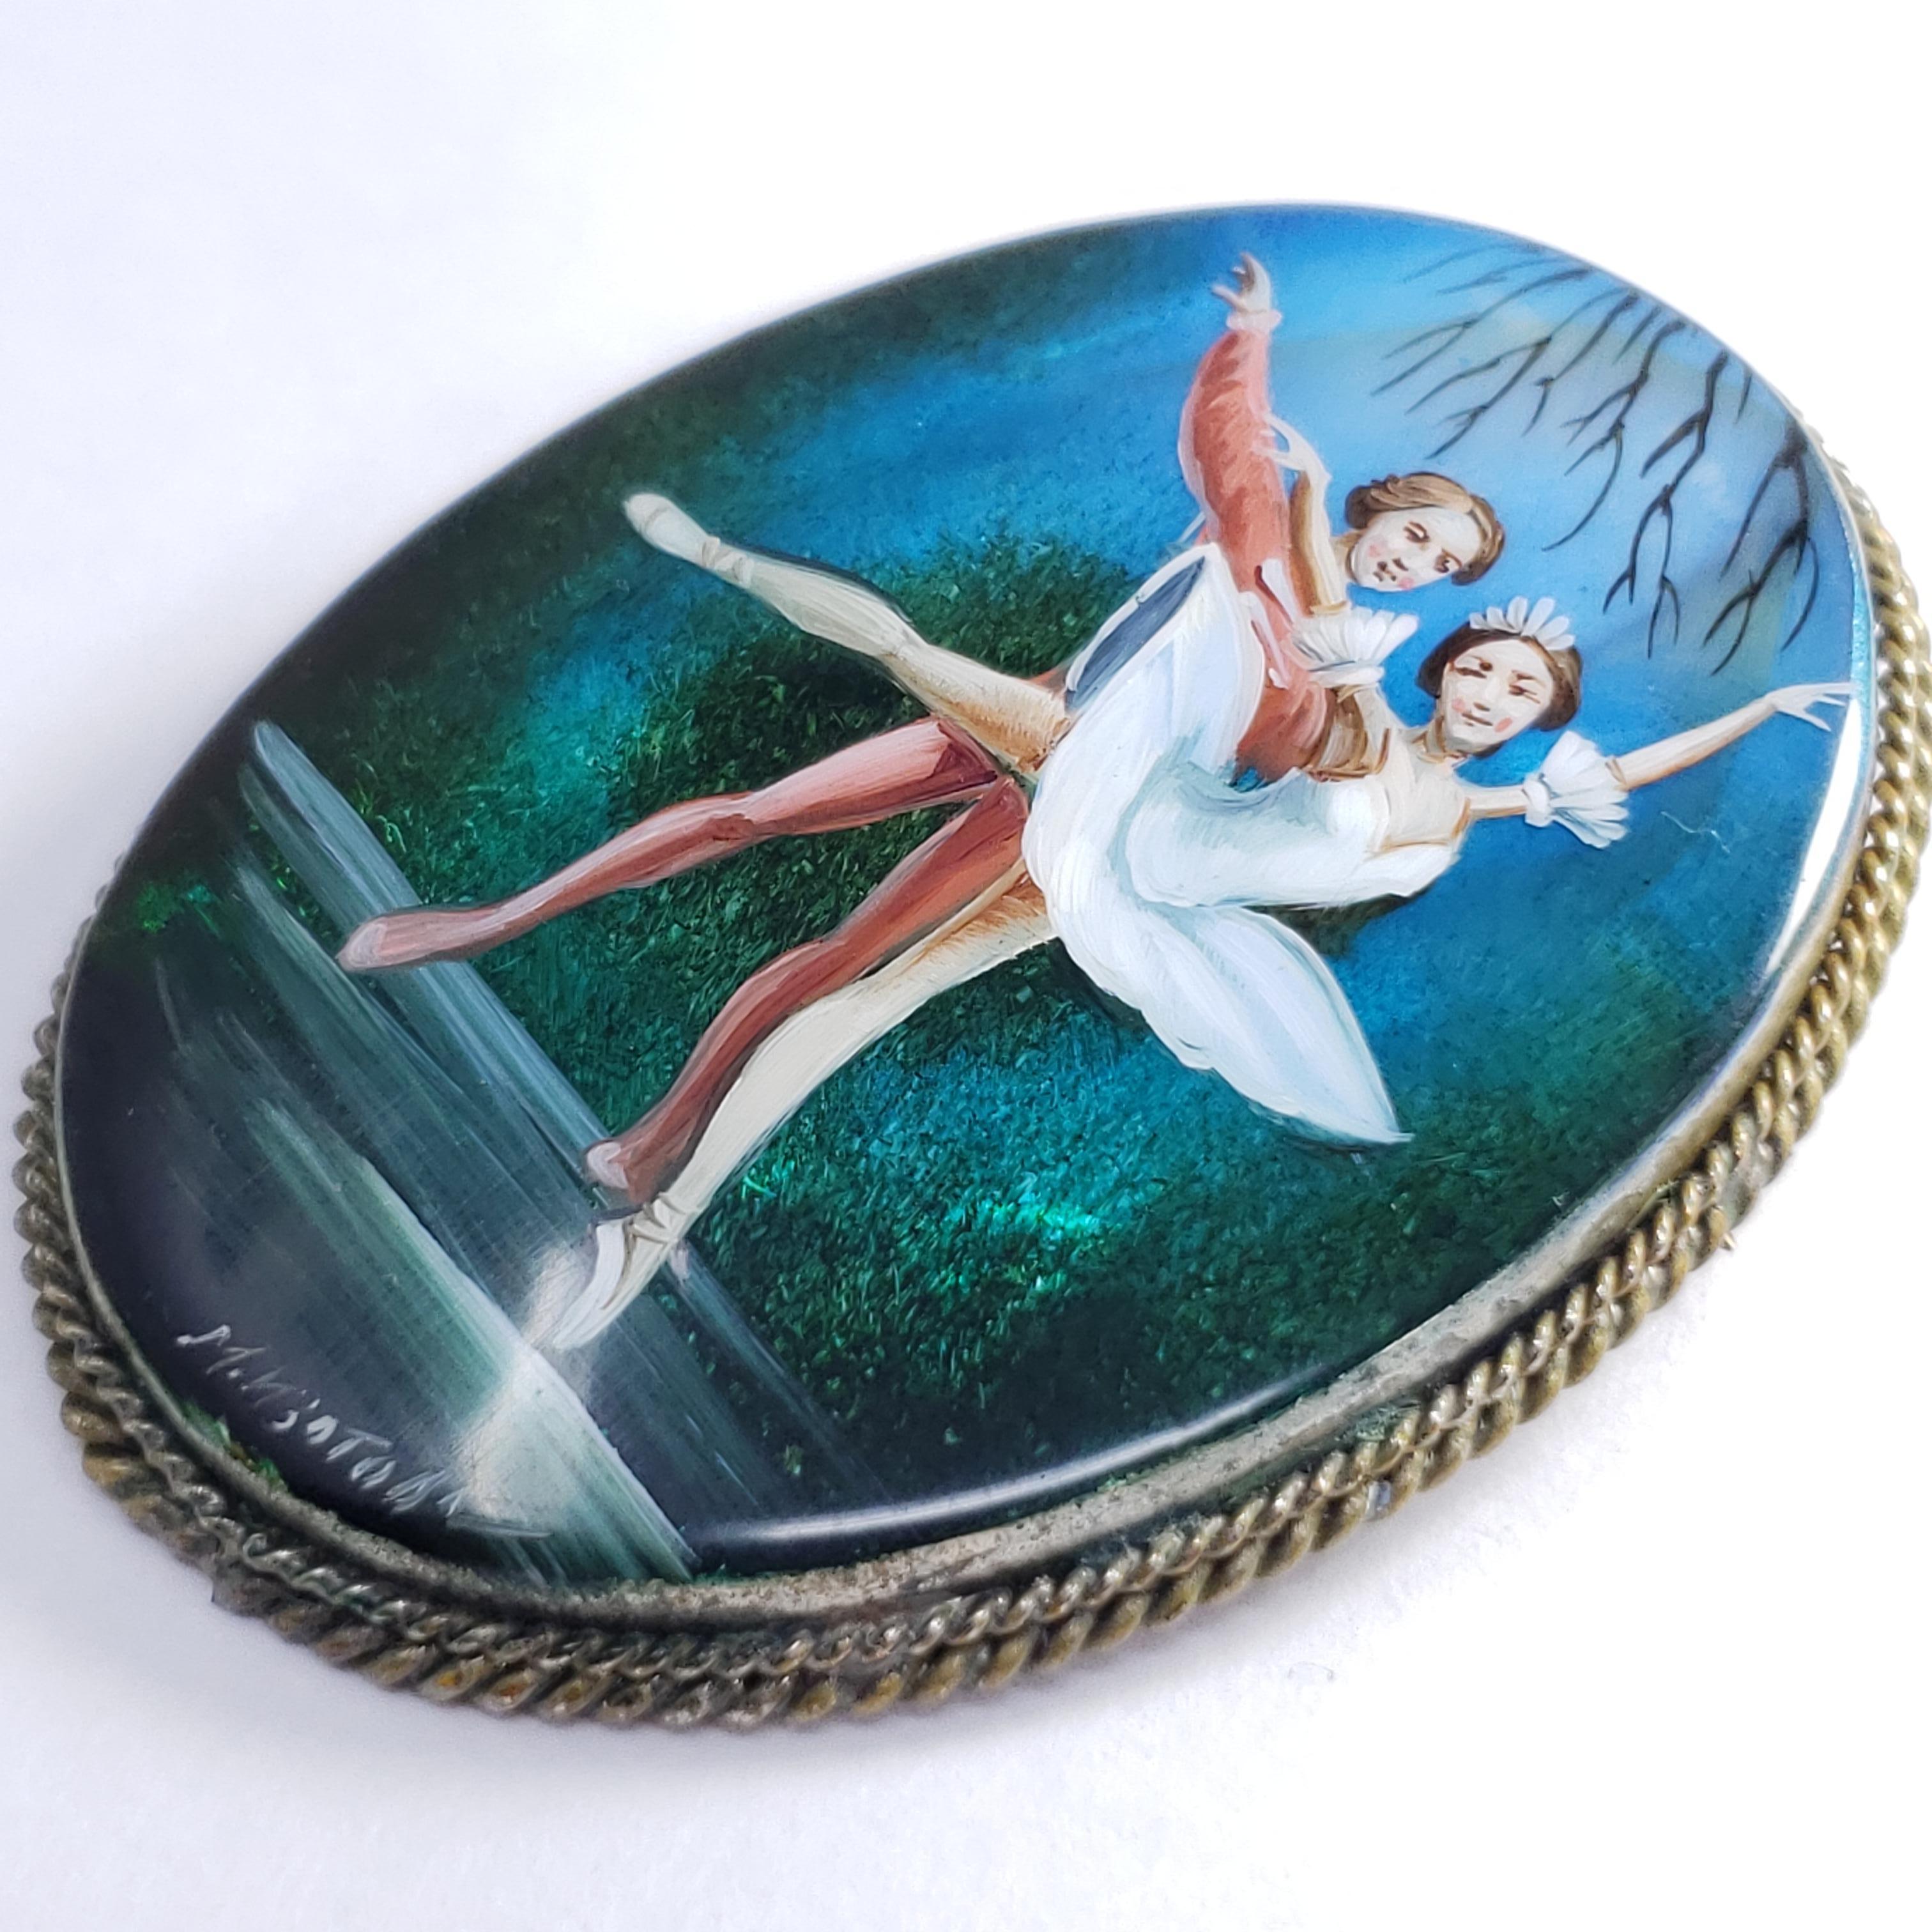 An exquisite Russian Fedoskino brooch set in a beautiful German silver bezel. Features a pair of ballet dancers on a blue-green background, hand-painted on a mother-of-pearl stone with a layer of lacquer.

Signed by artist - M Izotova (М